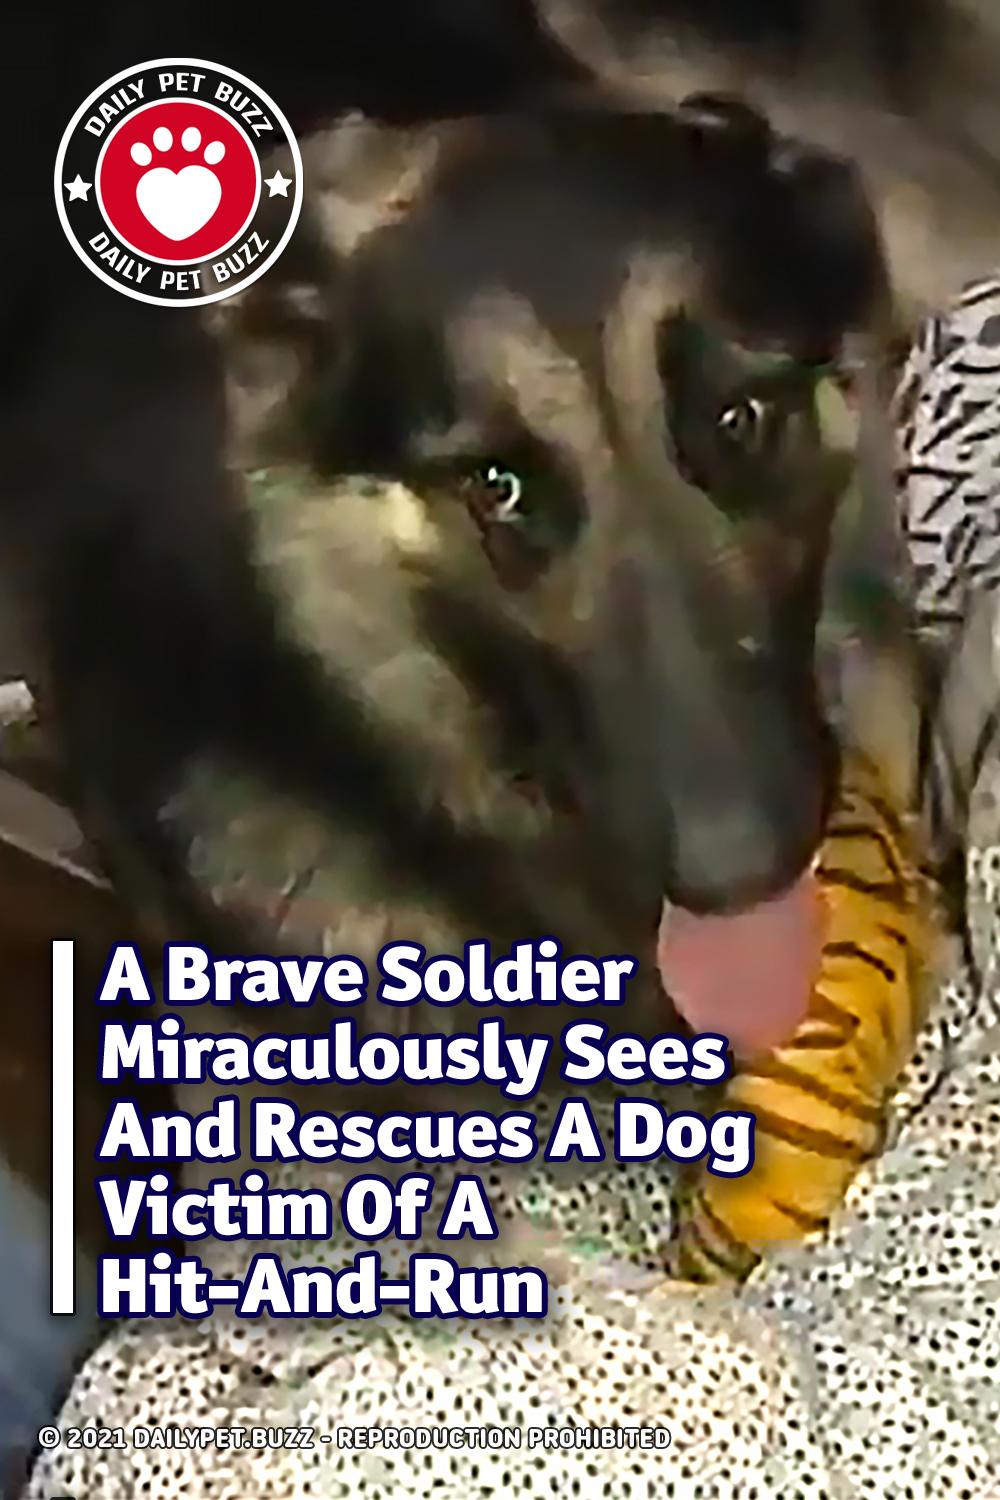 A Brave Soldier Miraculously Sees And Rescues A Dog Victim Of A Hit-And-Run